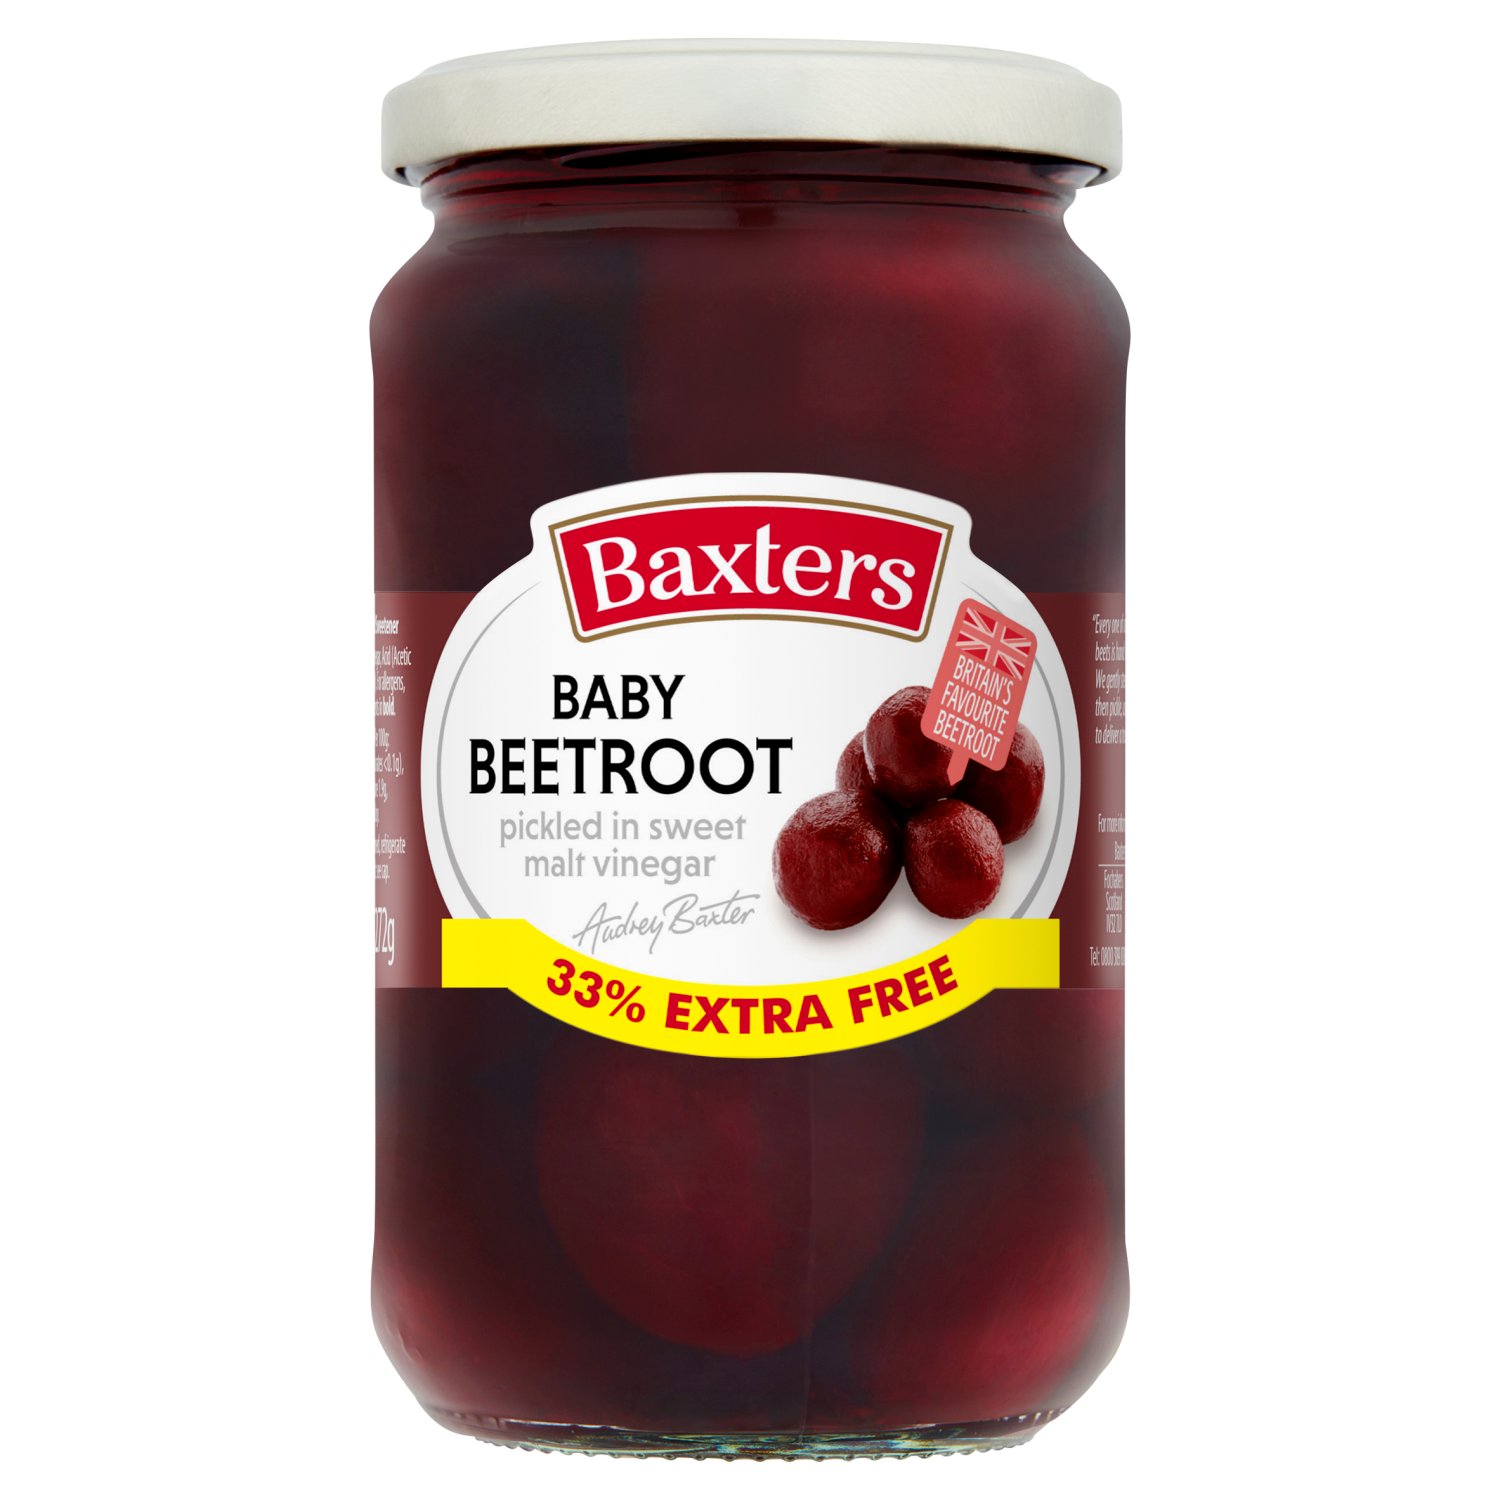 Baxters Baby Beetroot 33% Extra Free (455 g)